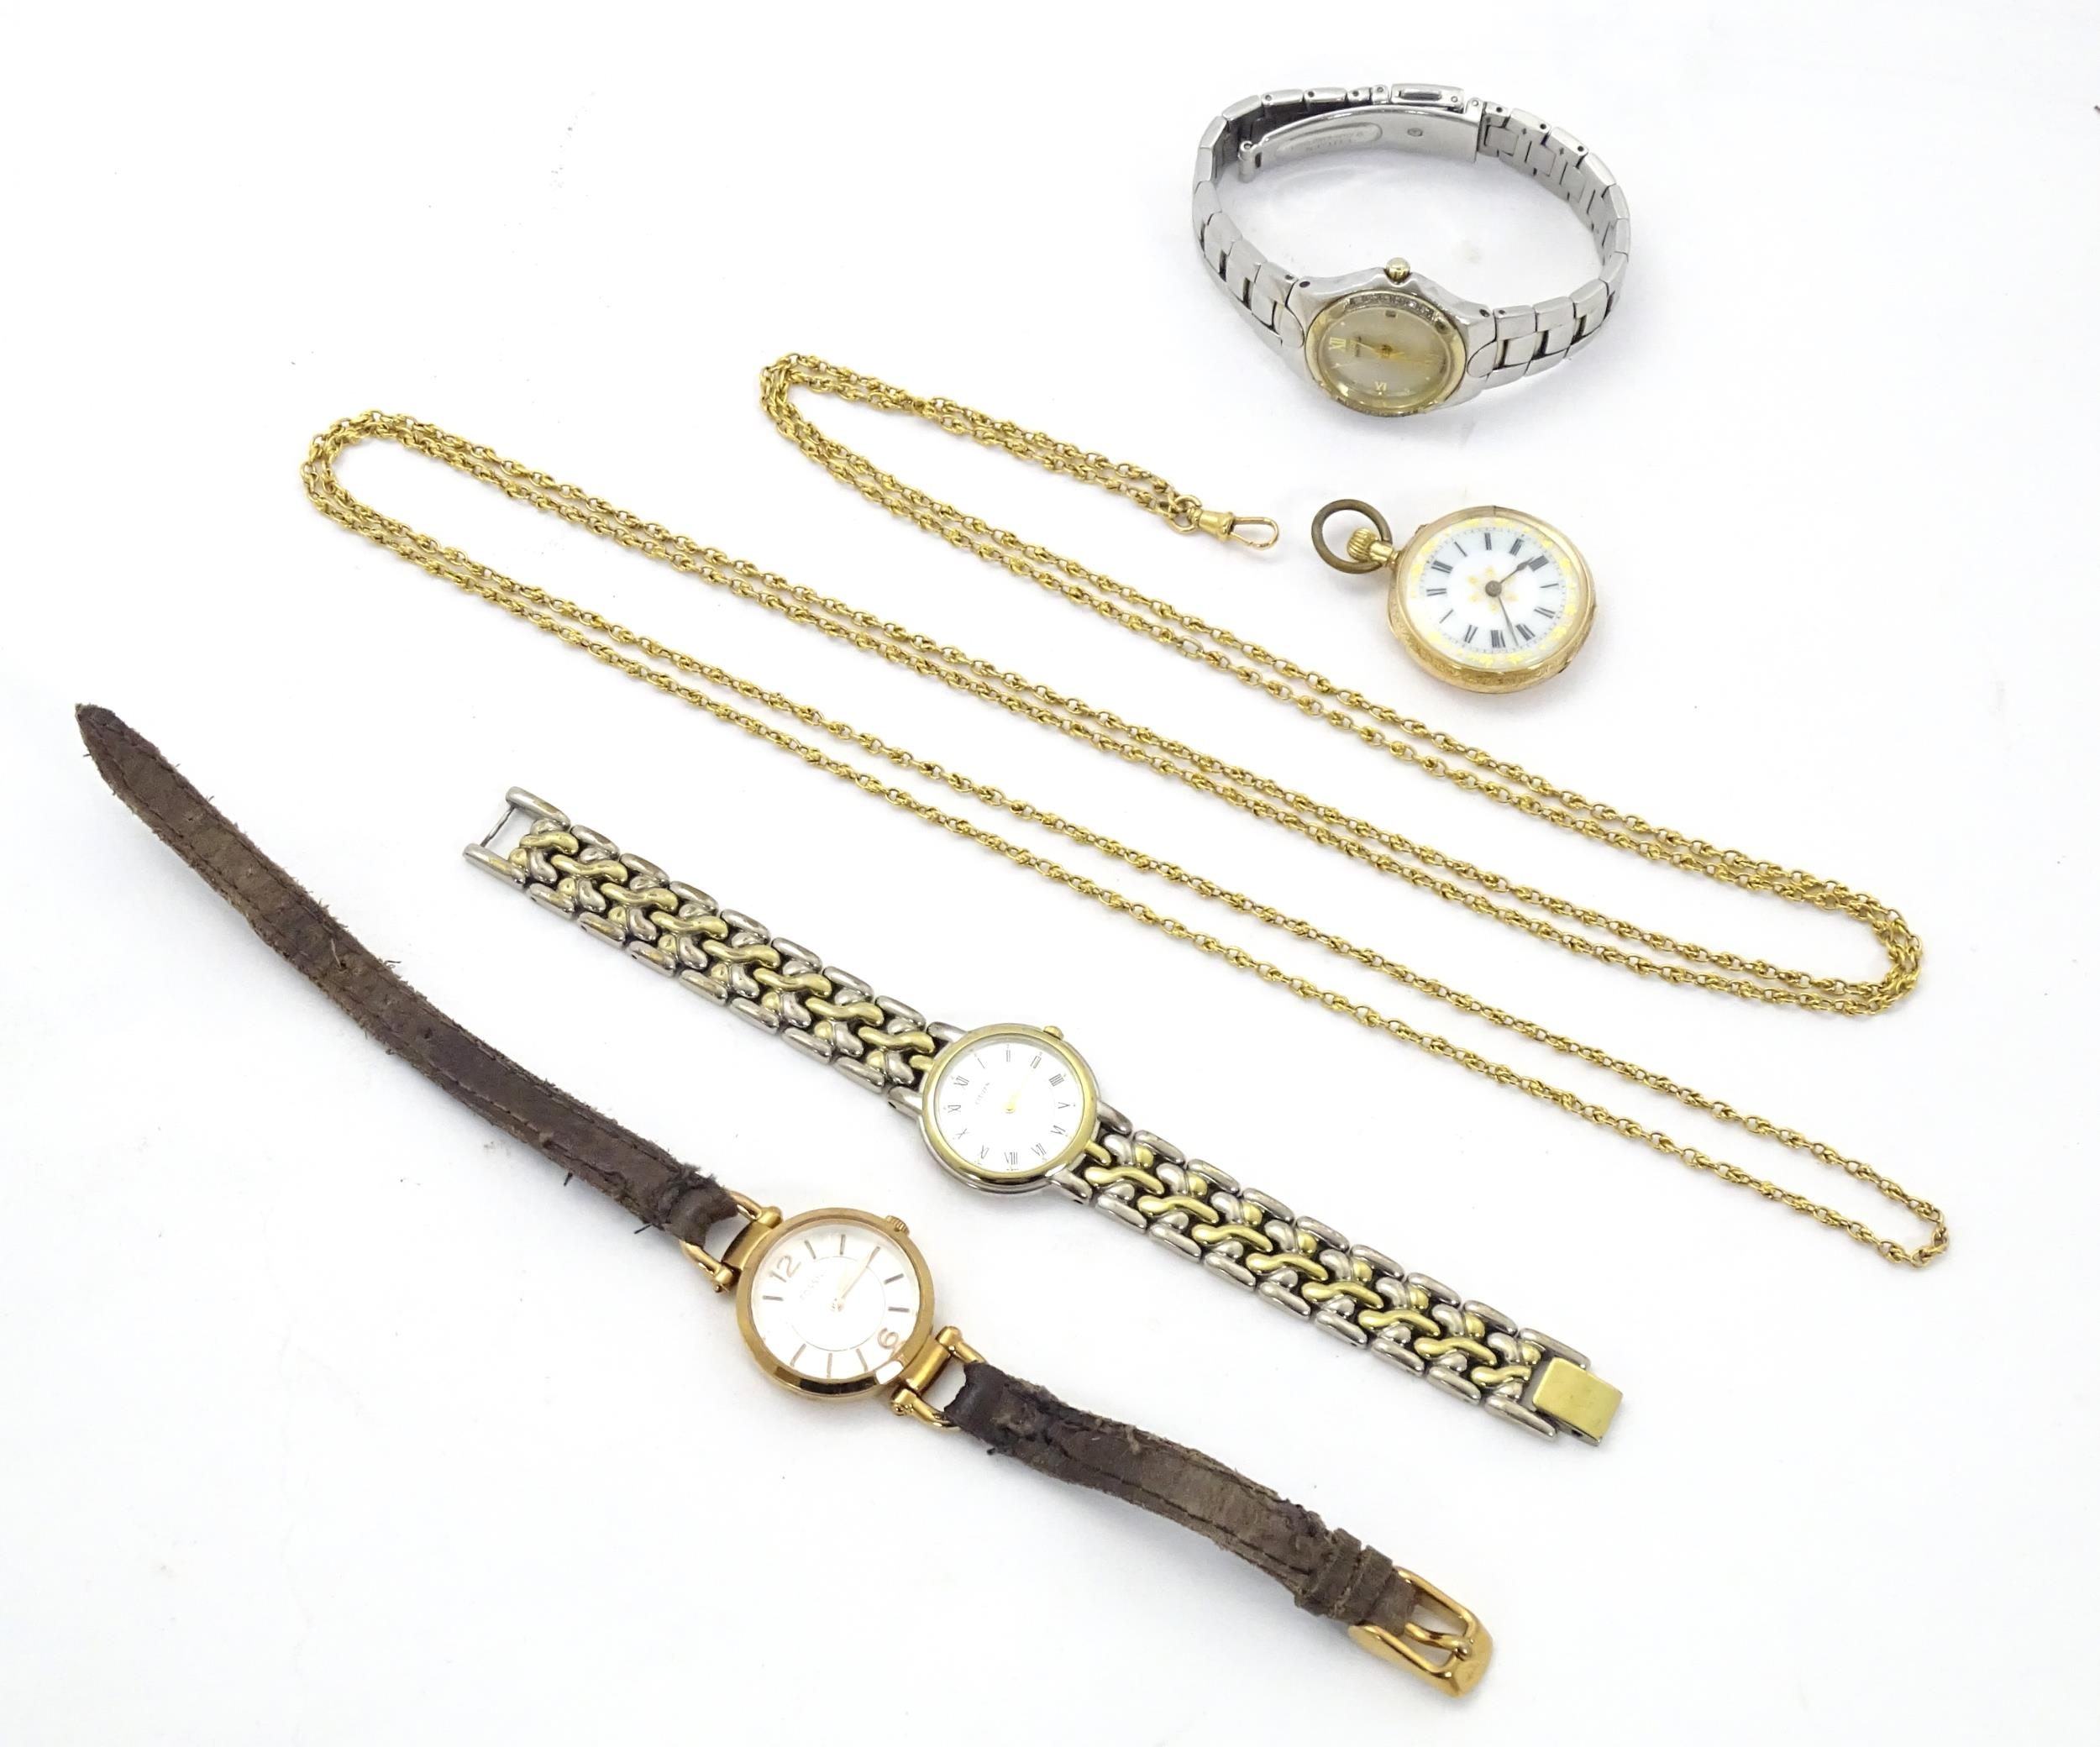 A quantity of quartz movement wrist watches to include two by Citizen, one by Fossil, and a fob - Image 6 of 32